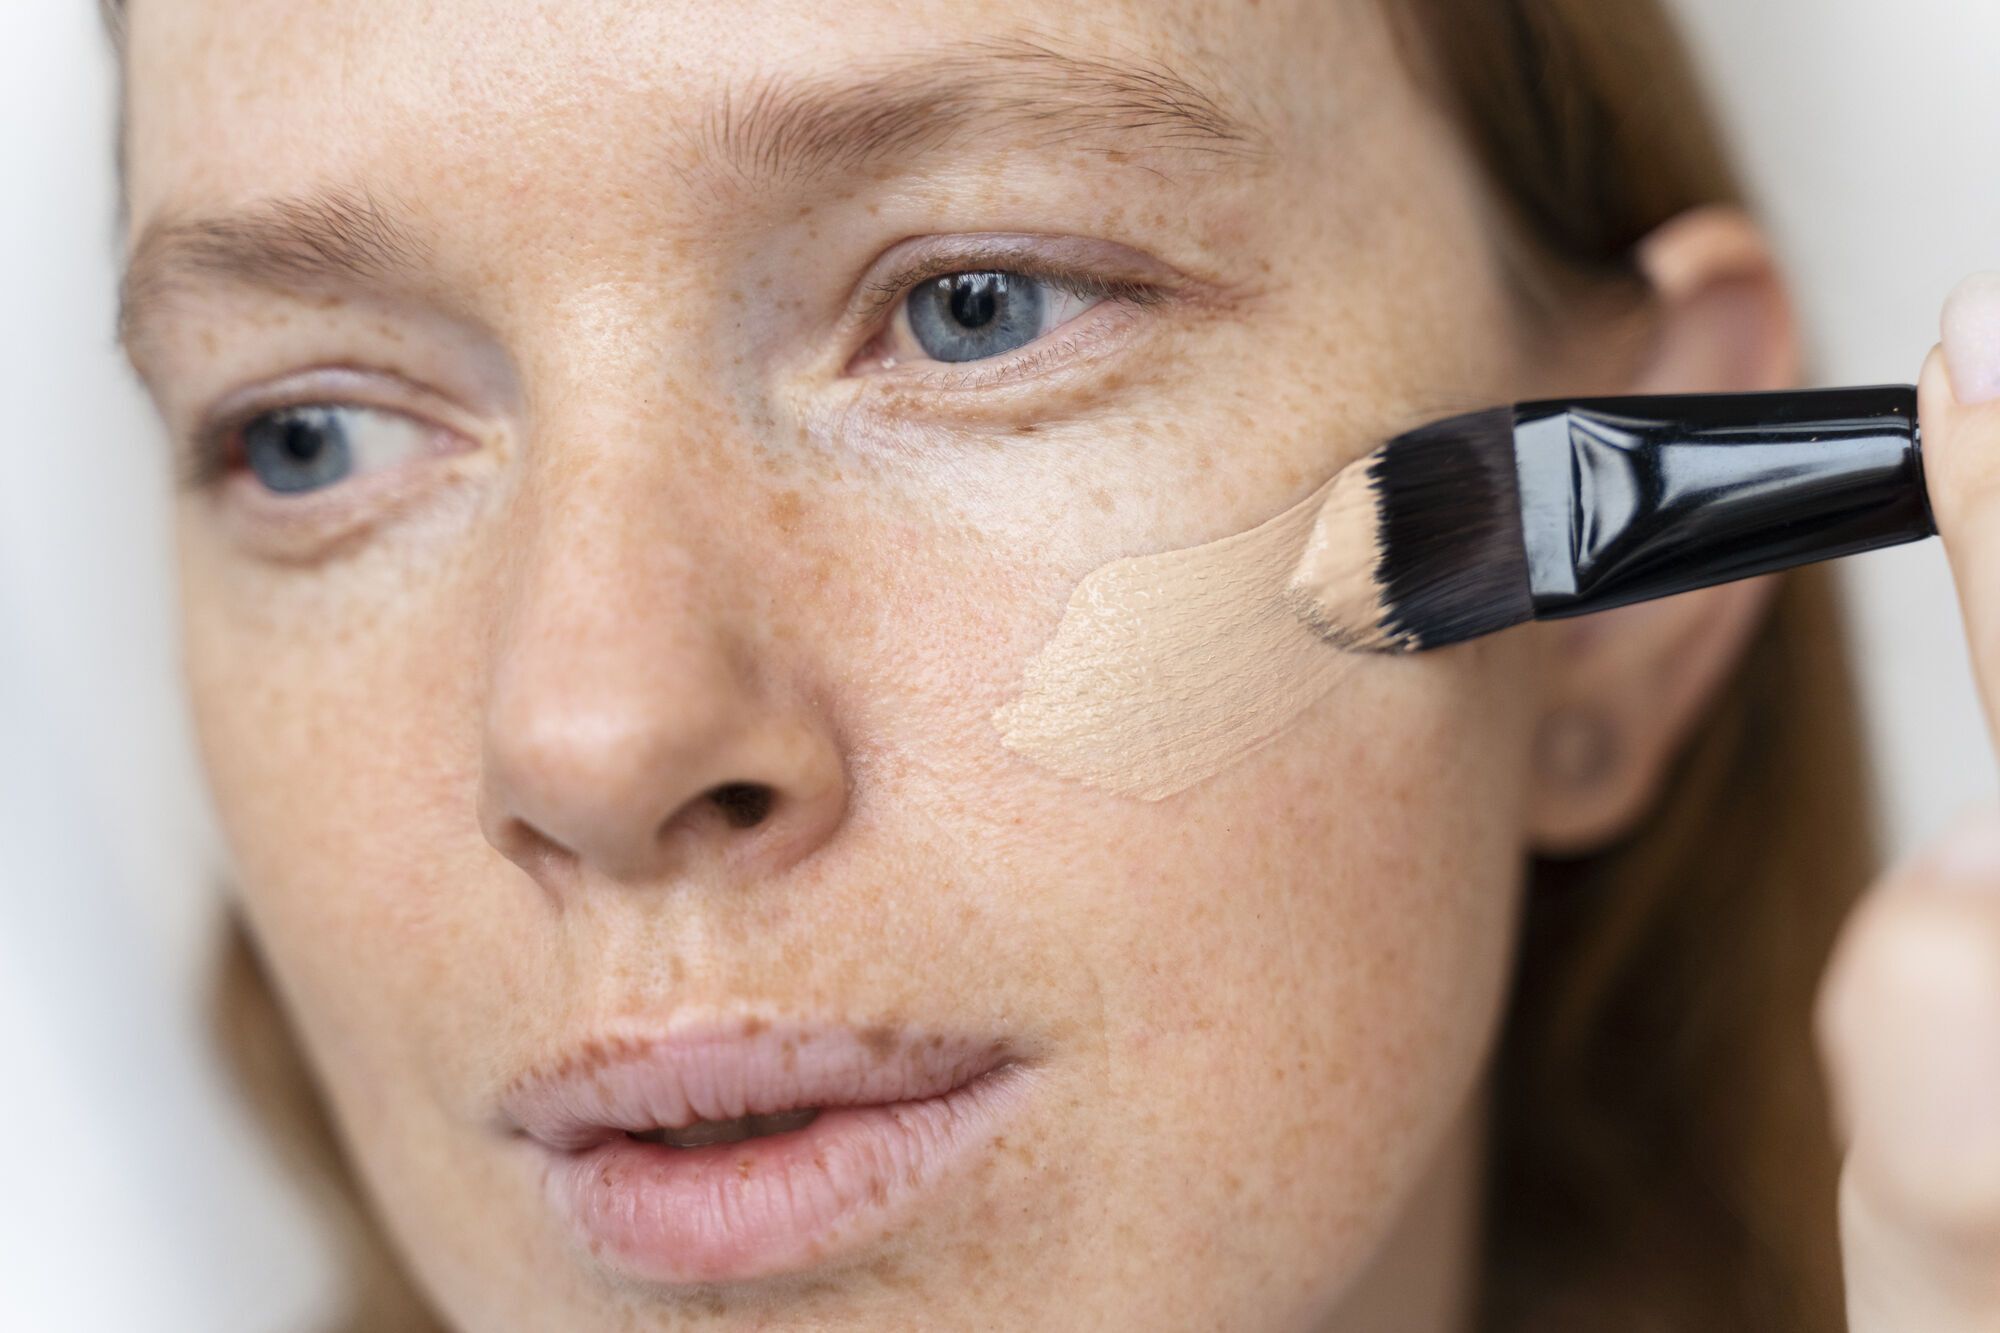 How to do light makeup and hide all skin imperfections at the same time: try this effective ''micro-concealing'' technique 